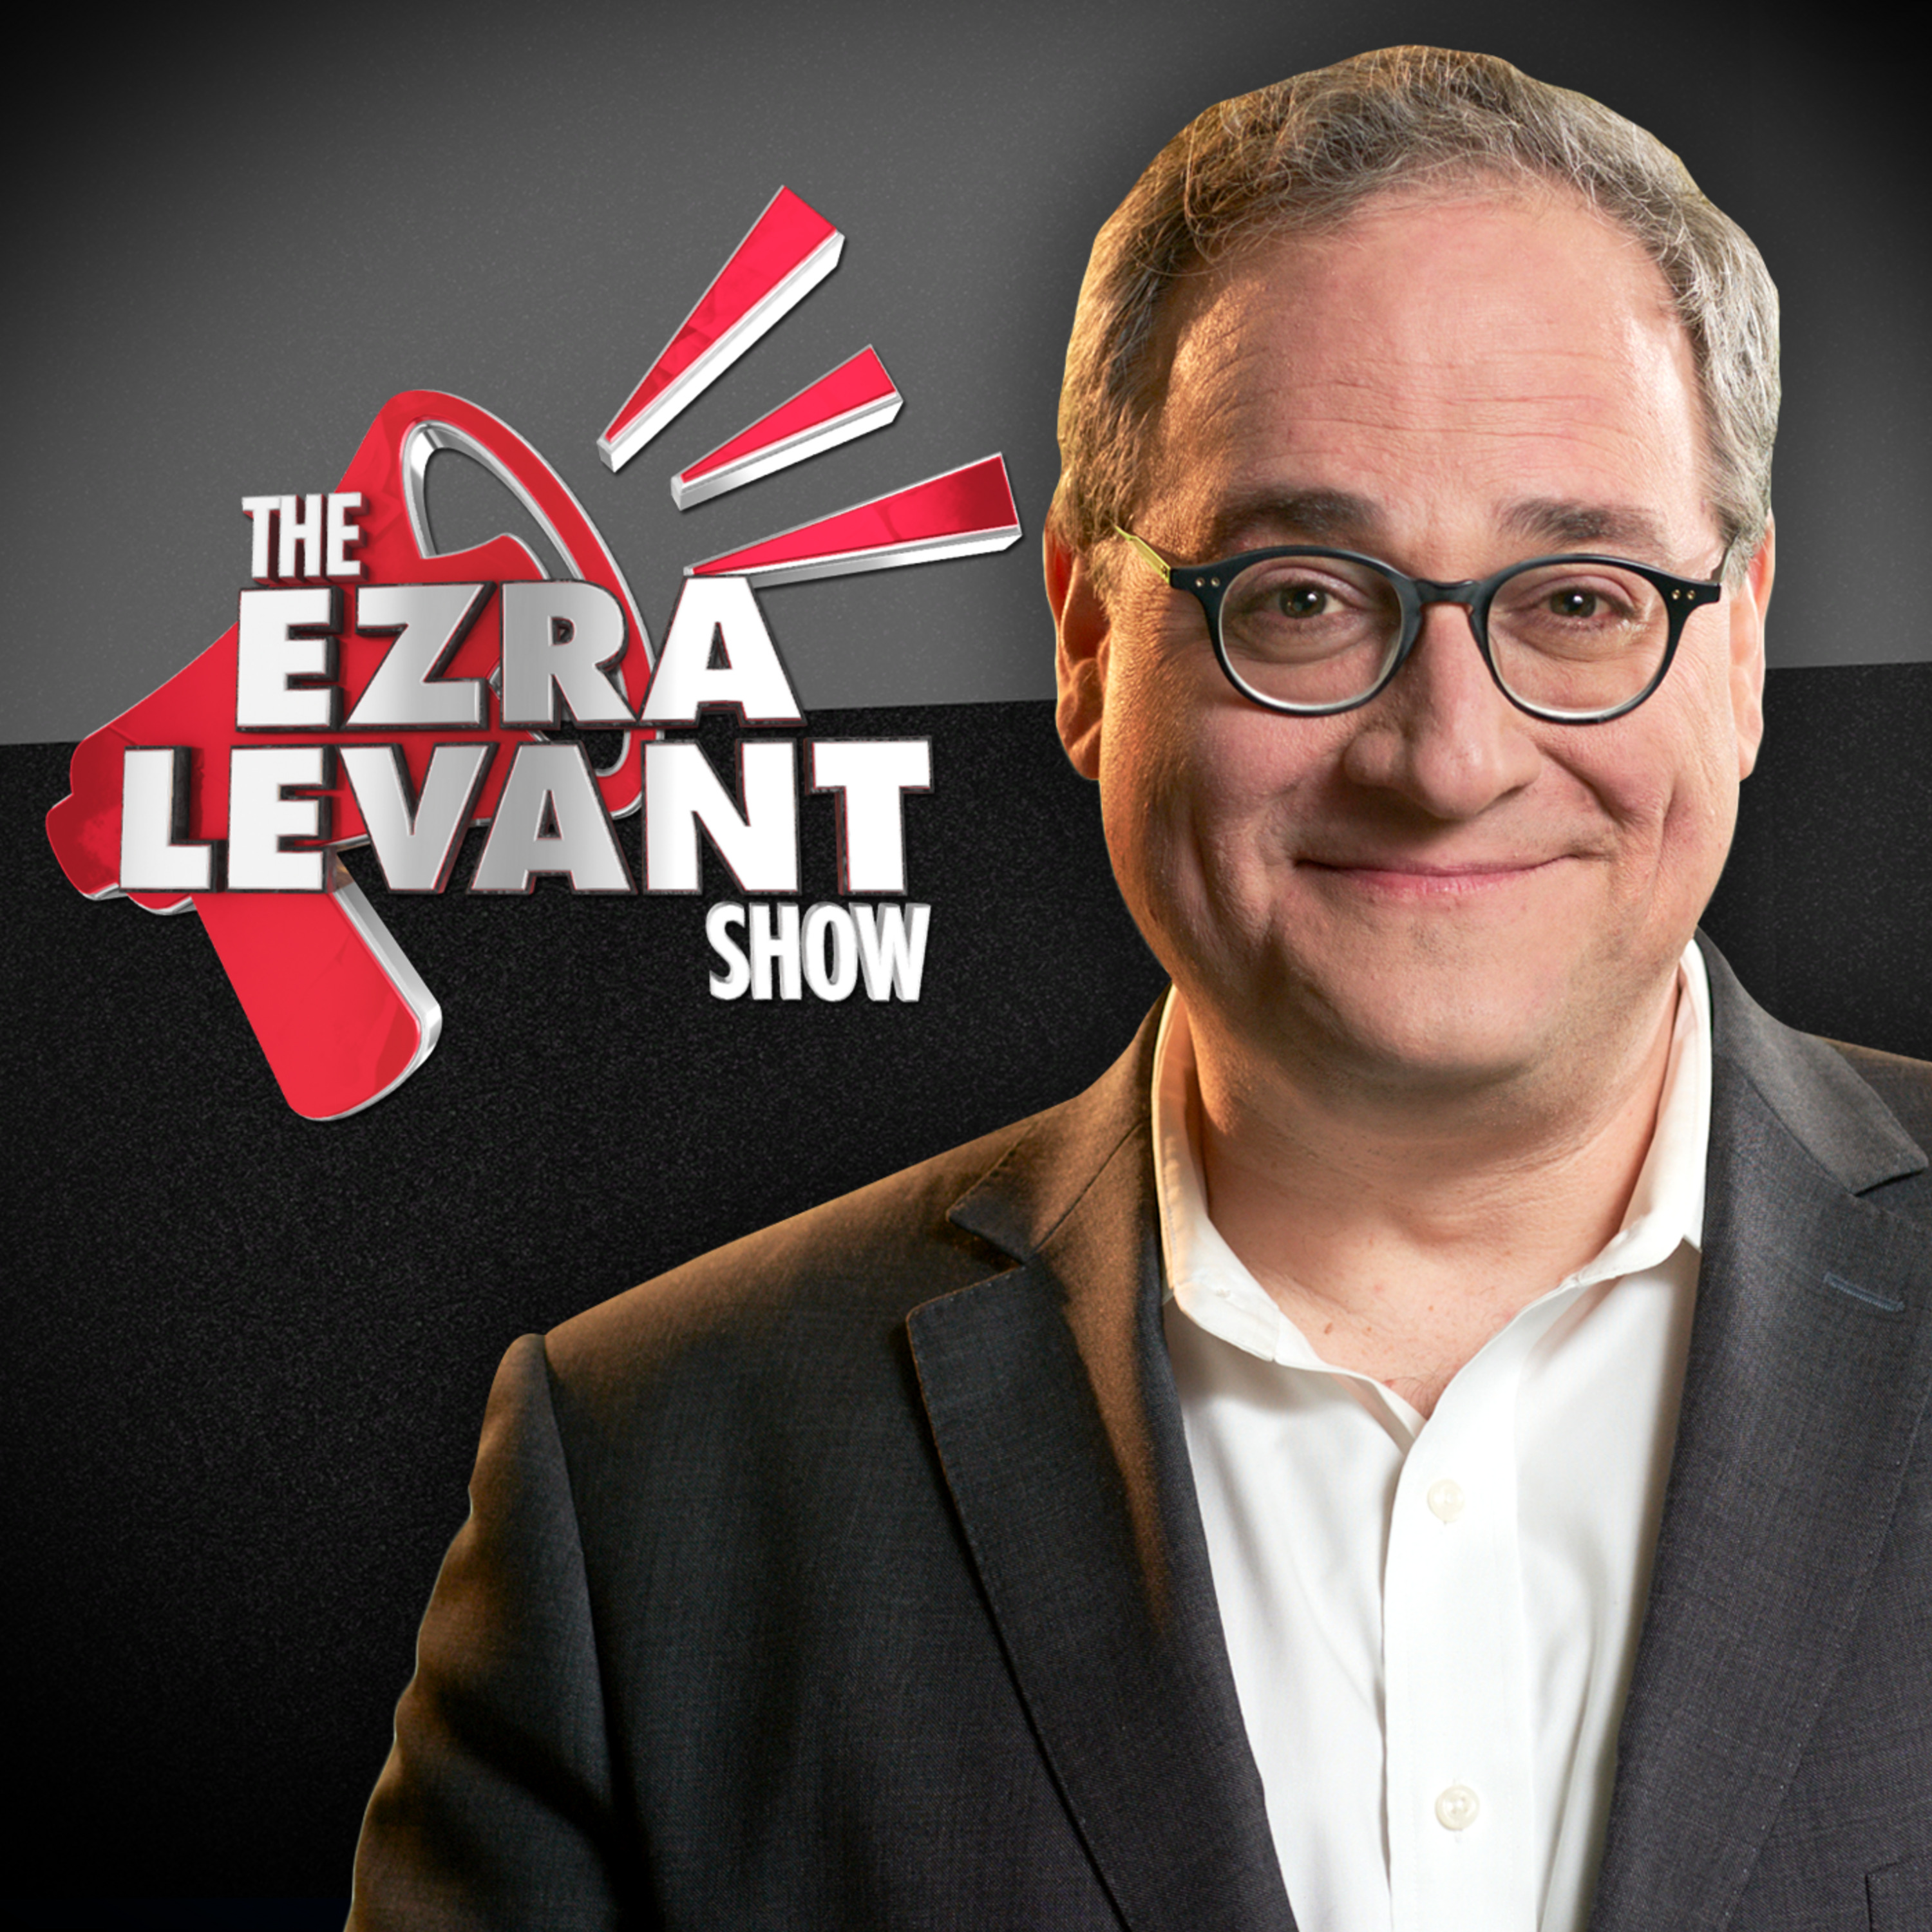 EZRA LEVANT | What does the Canadian flag represent to you in 2022?